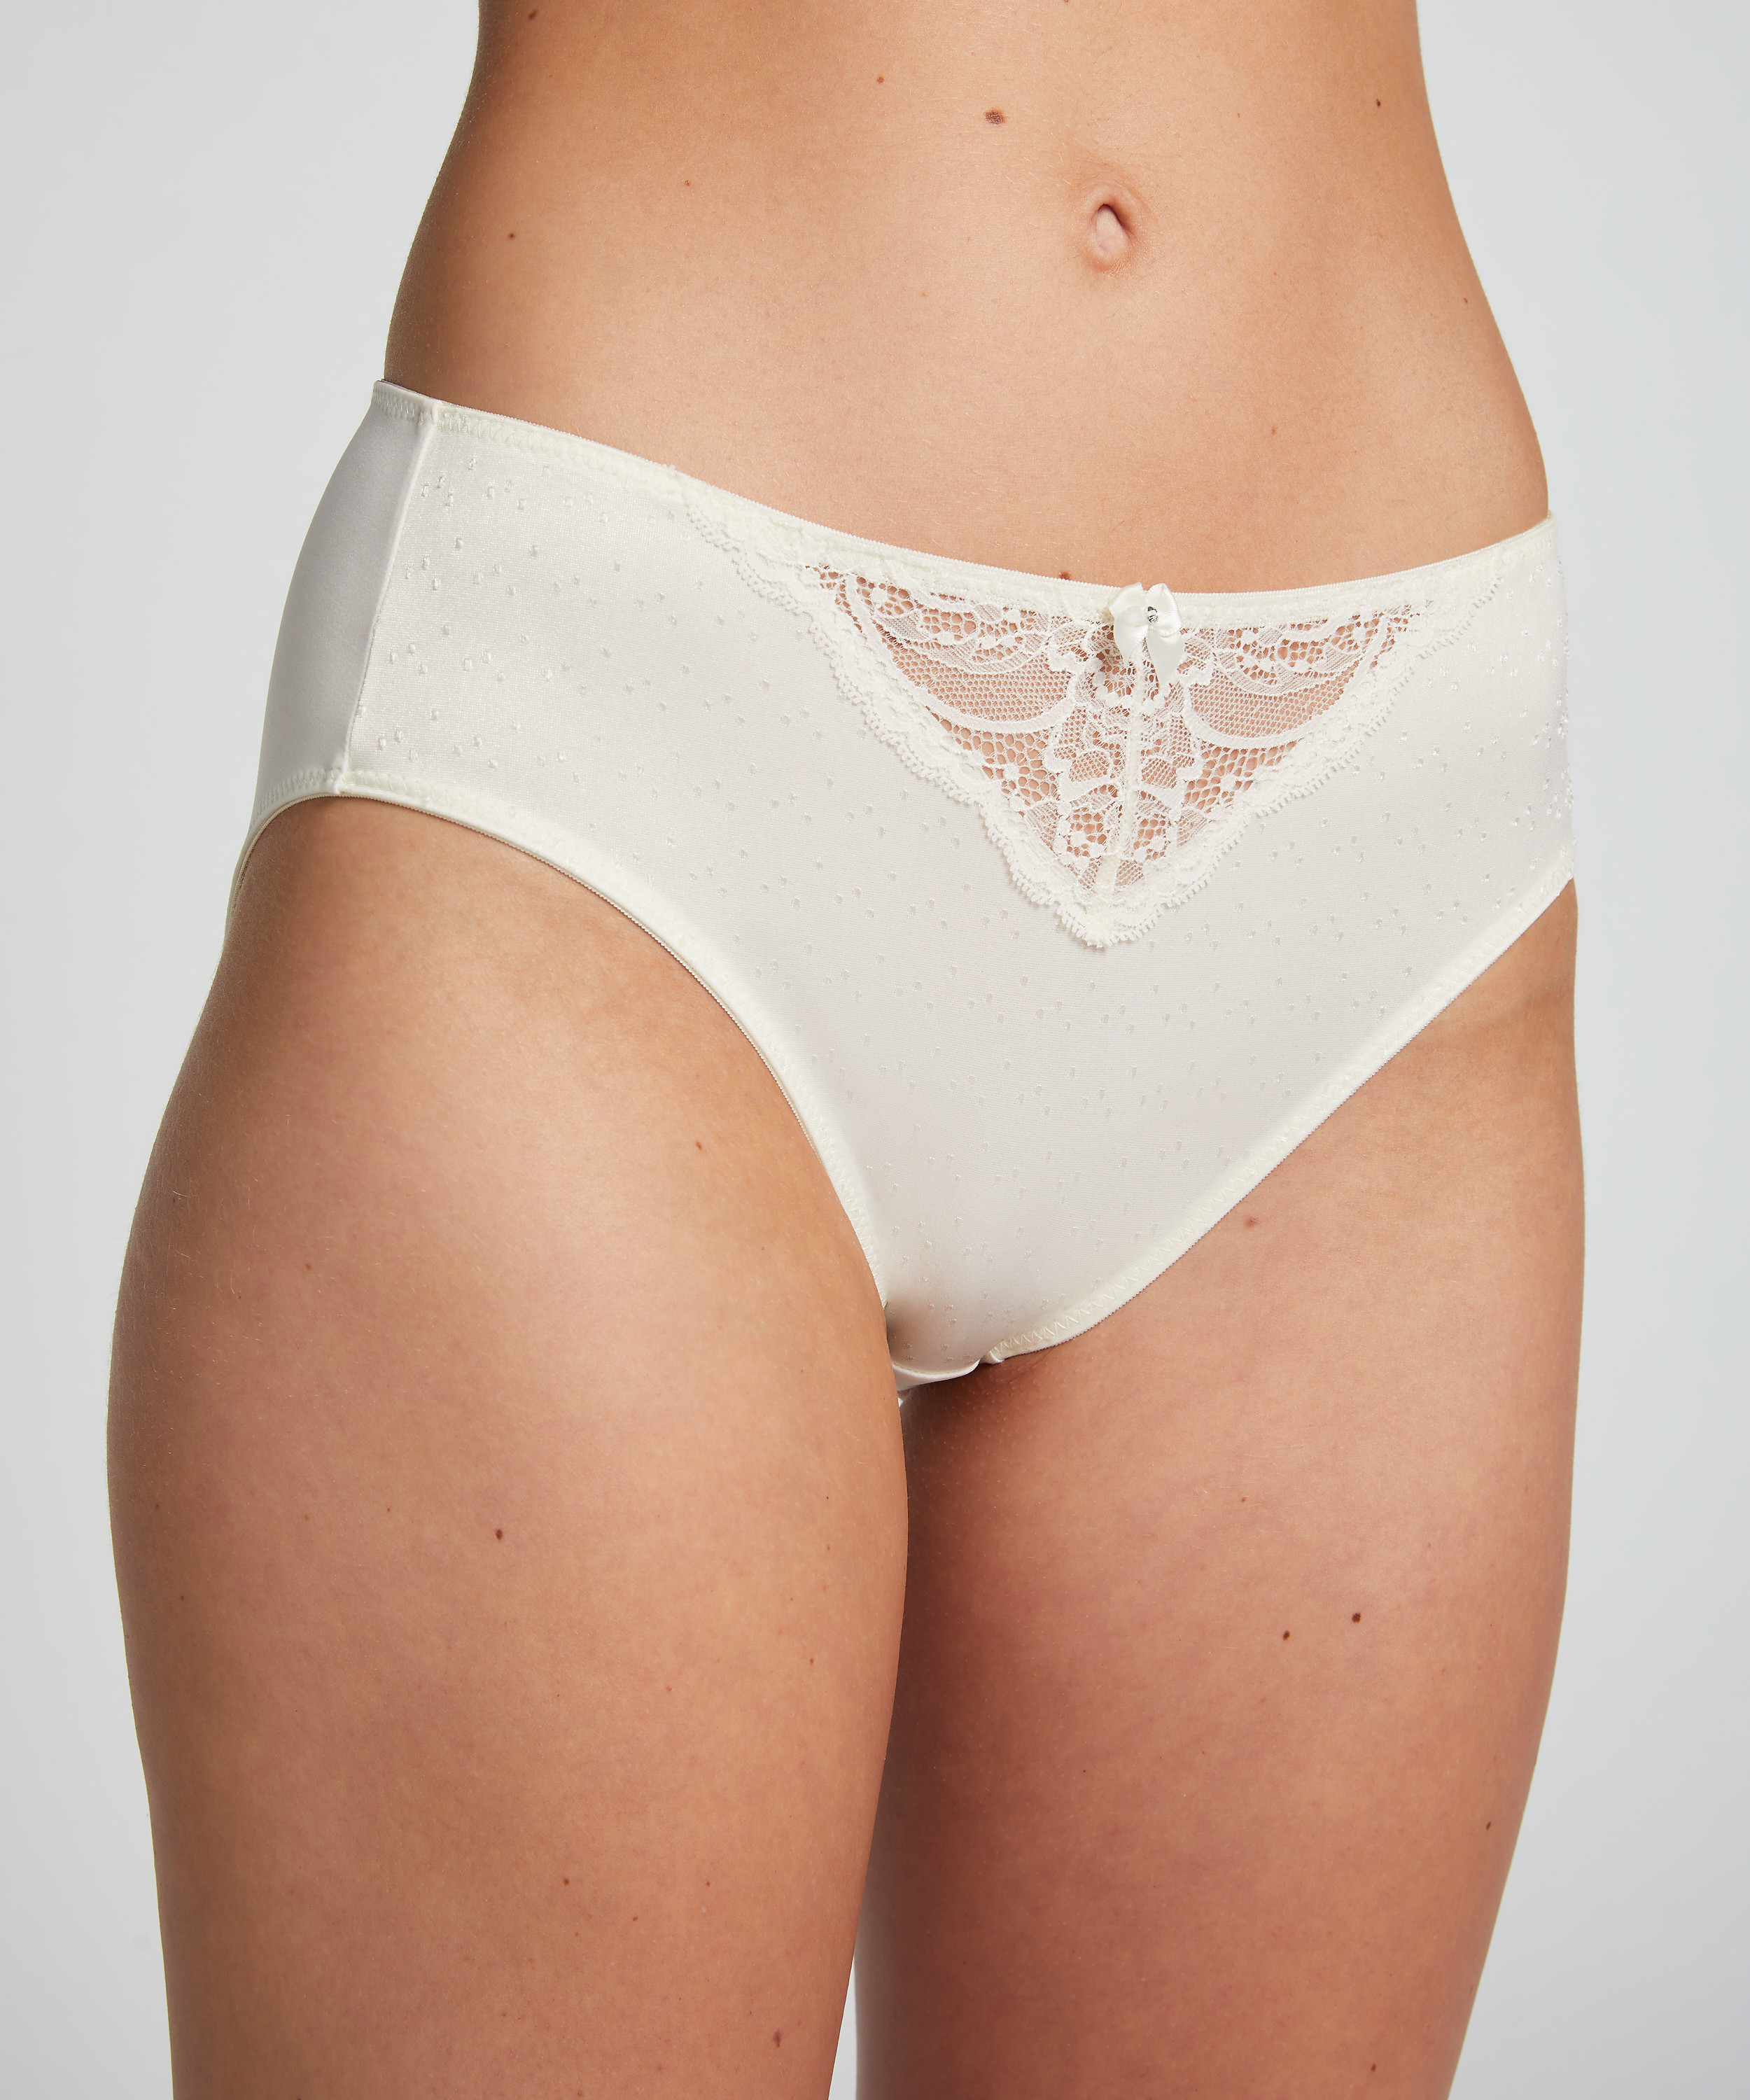 Sophie high knickers, White, main